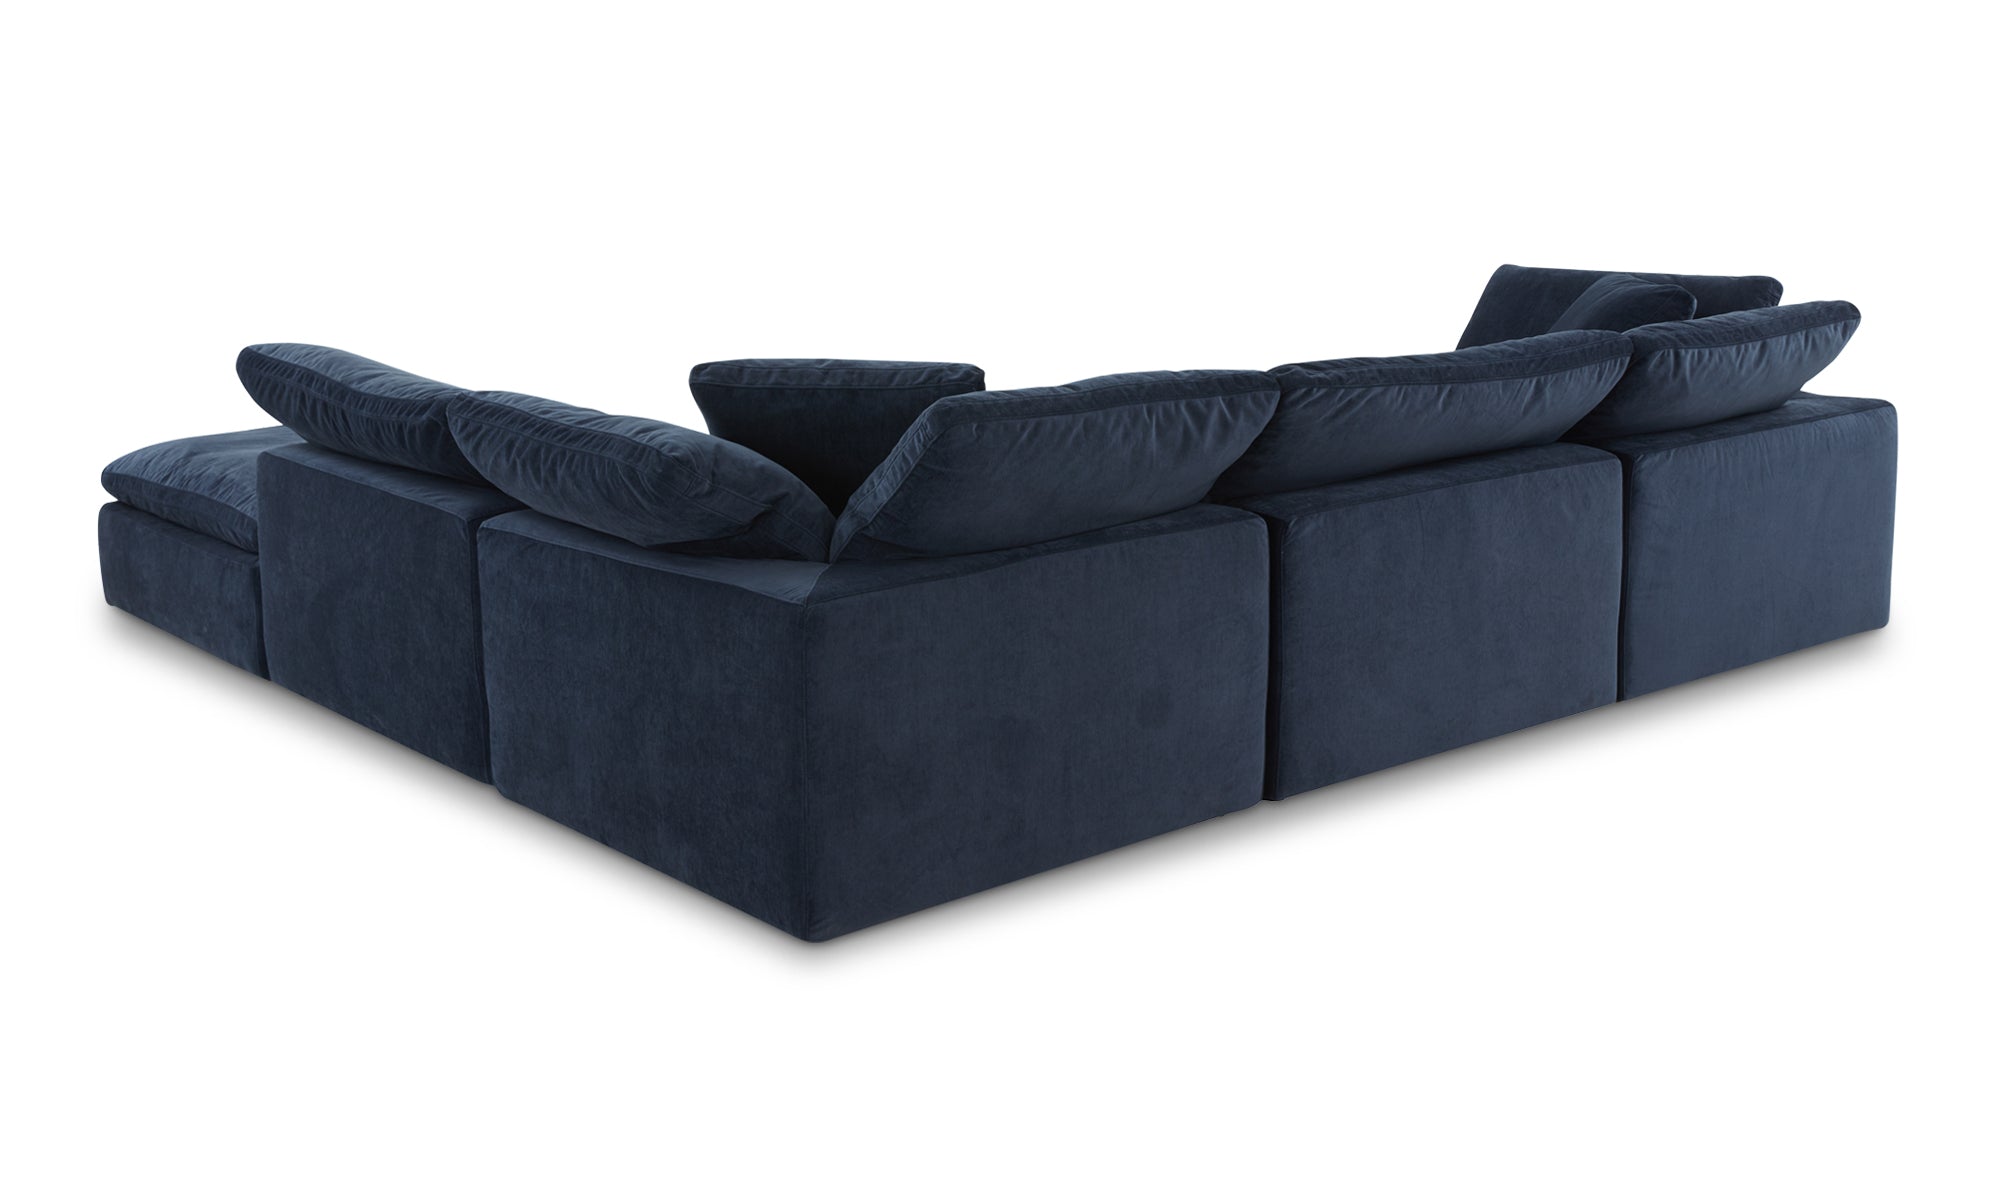 Clay Dream Modular Sectional Performance Fabric - Nocturnal Sky